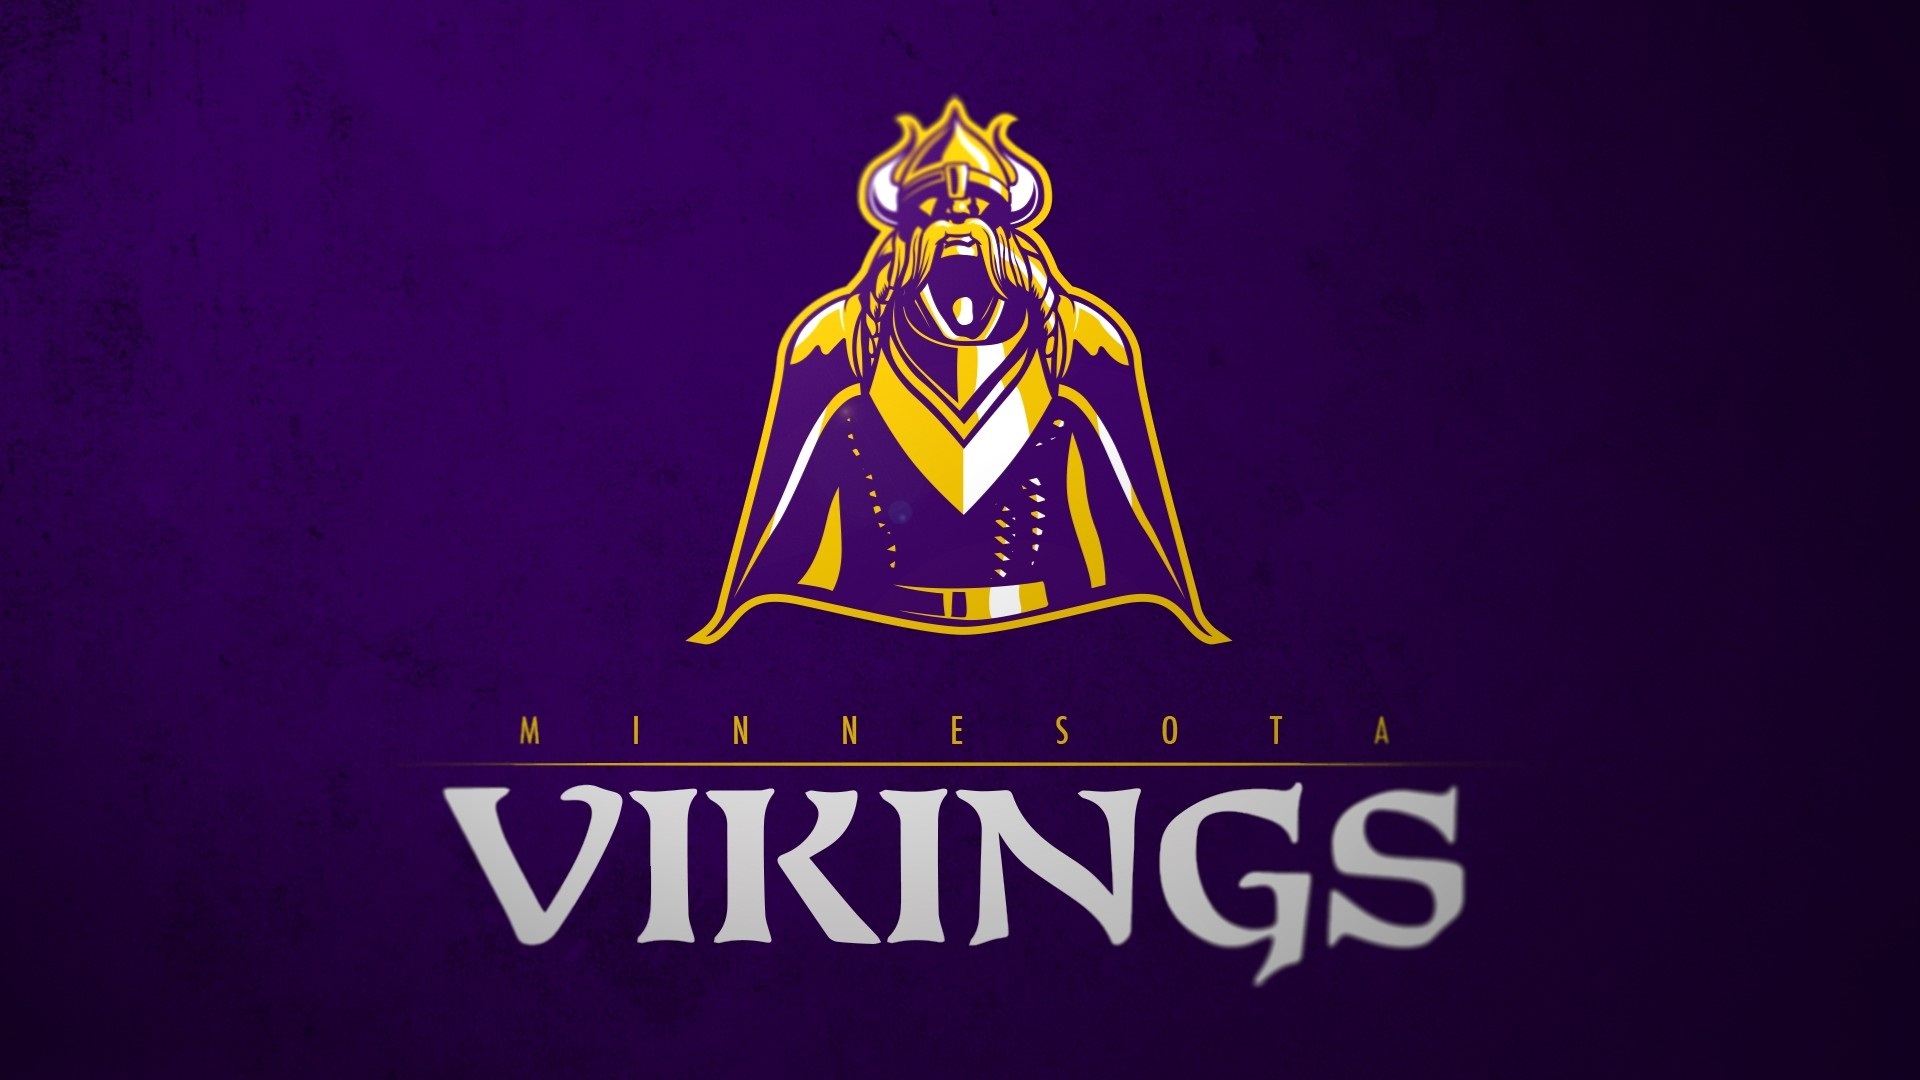 Minnesota Vikings Desktop Wallpaper With Resolution 1920X1080 pixel. You can make this wallpaper for your Mac or Windows Desktop Background, iPhone, Android or Tablet and another Smartphone device for free